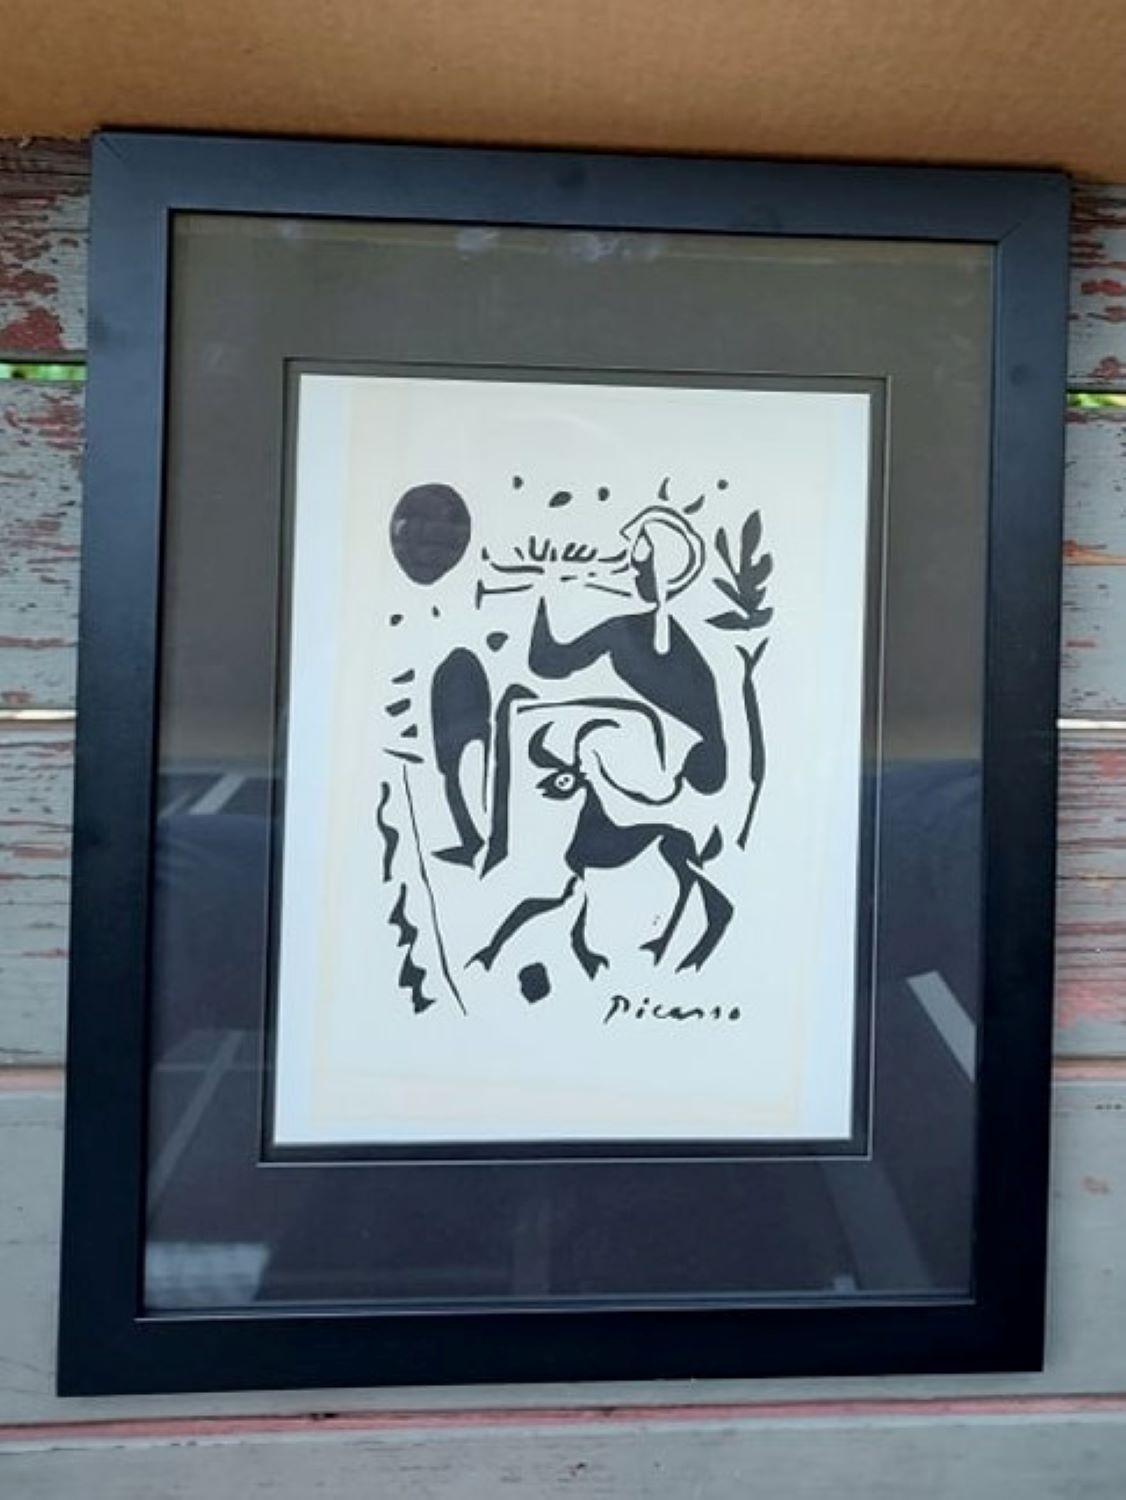 Musical Faun by Picasso  - Cubist Print by Pablo Picasso